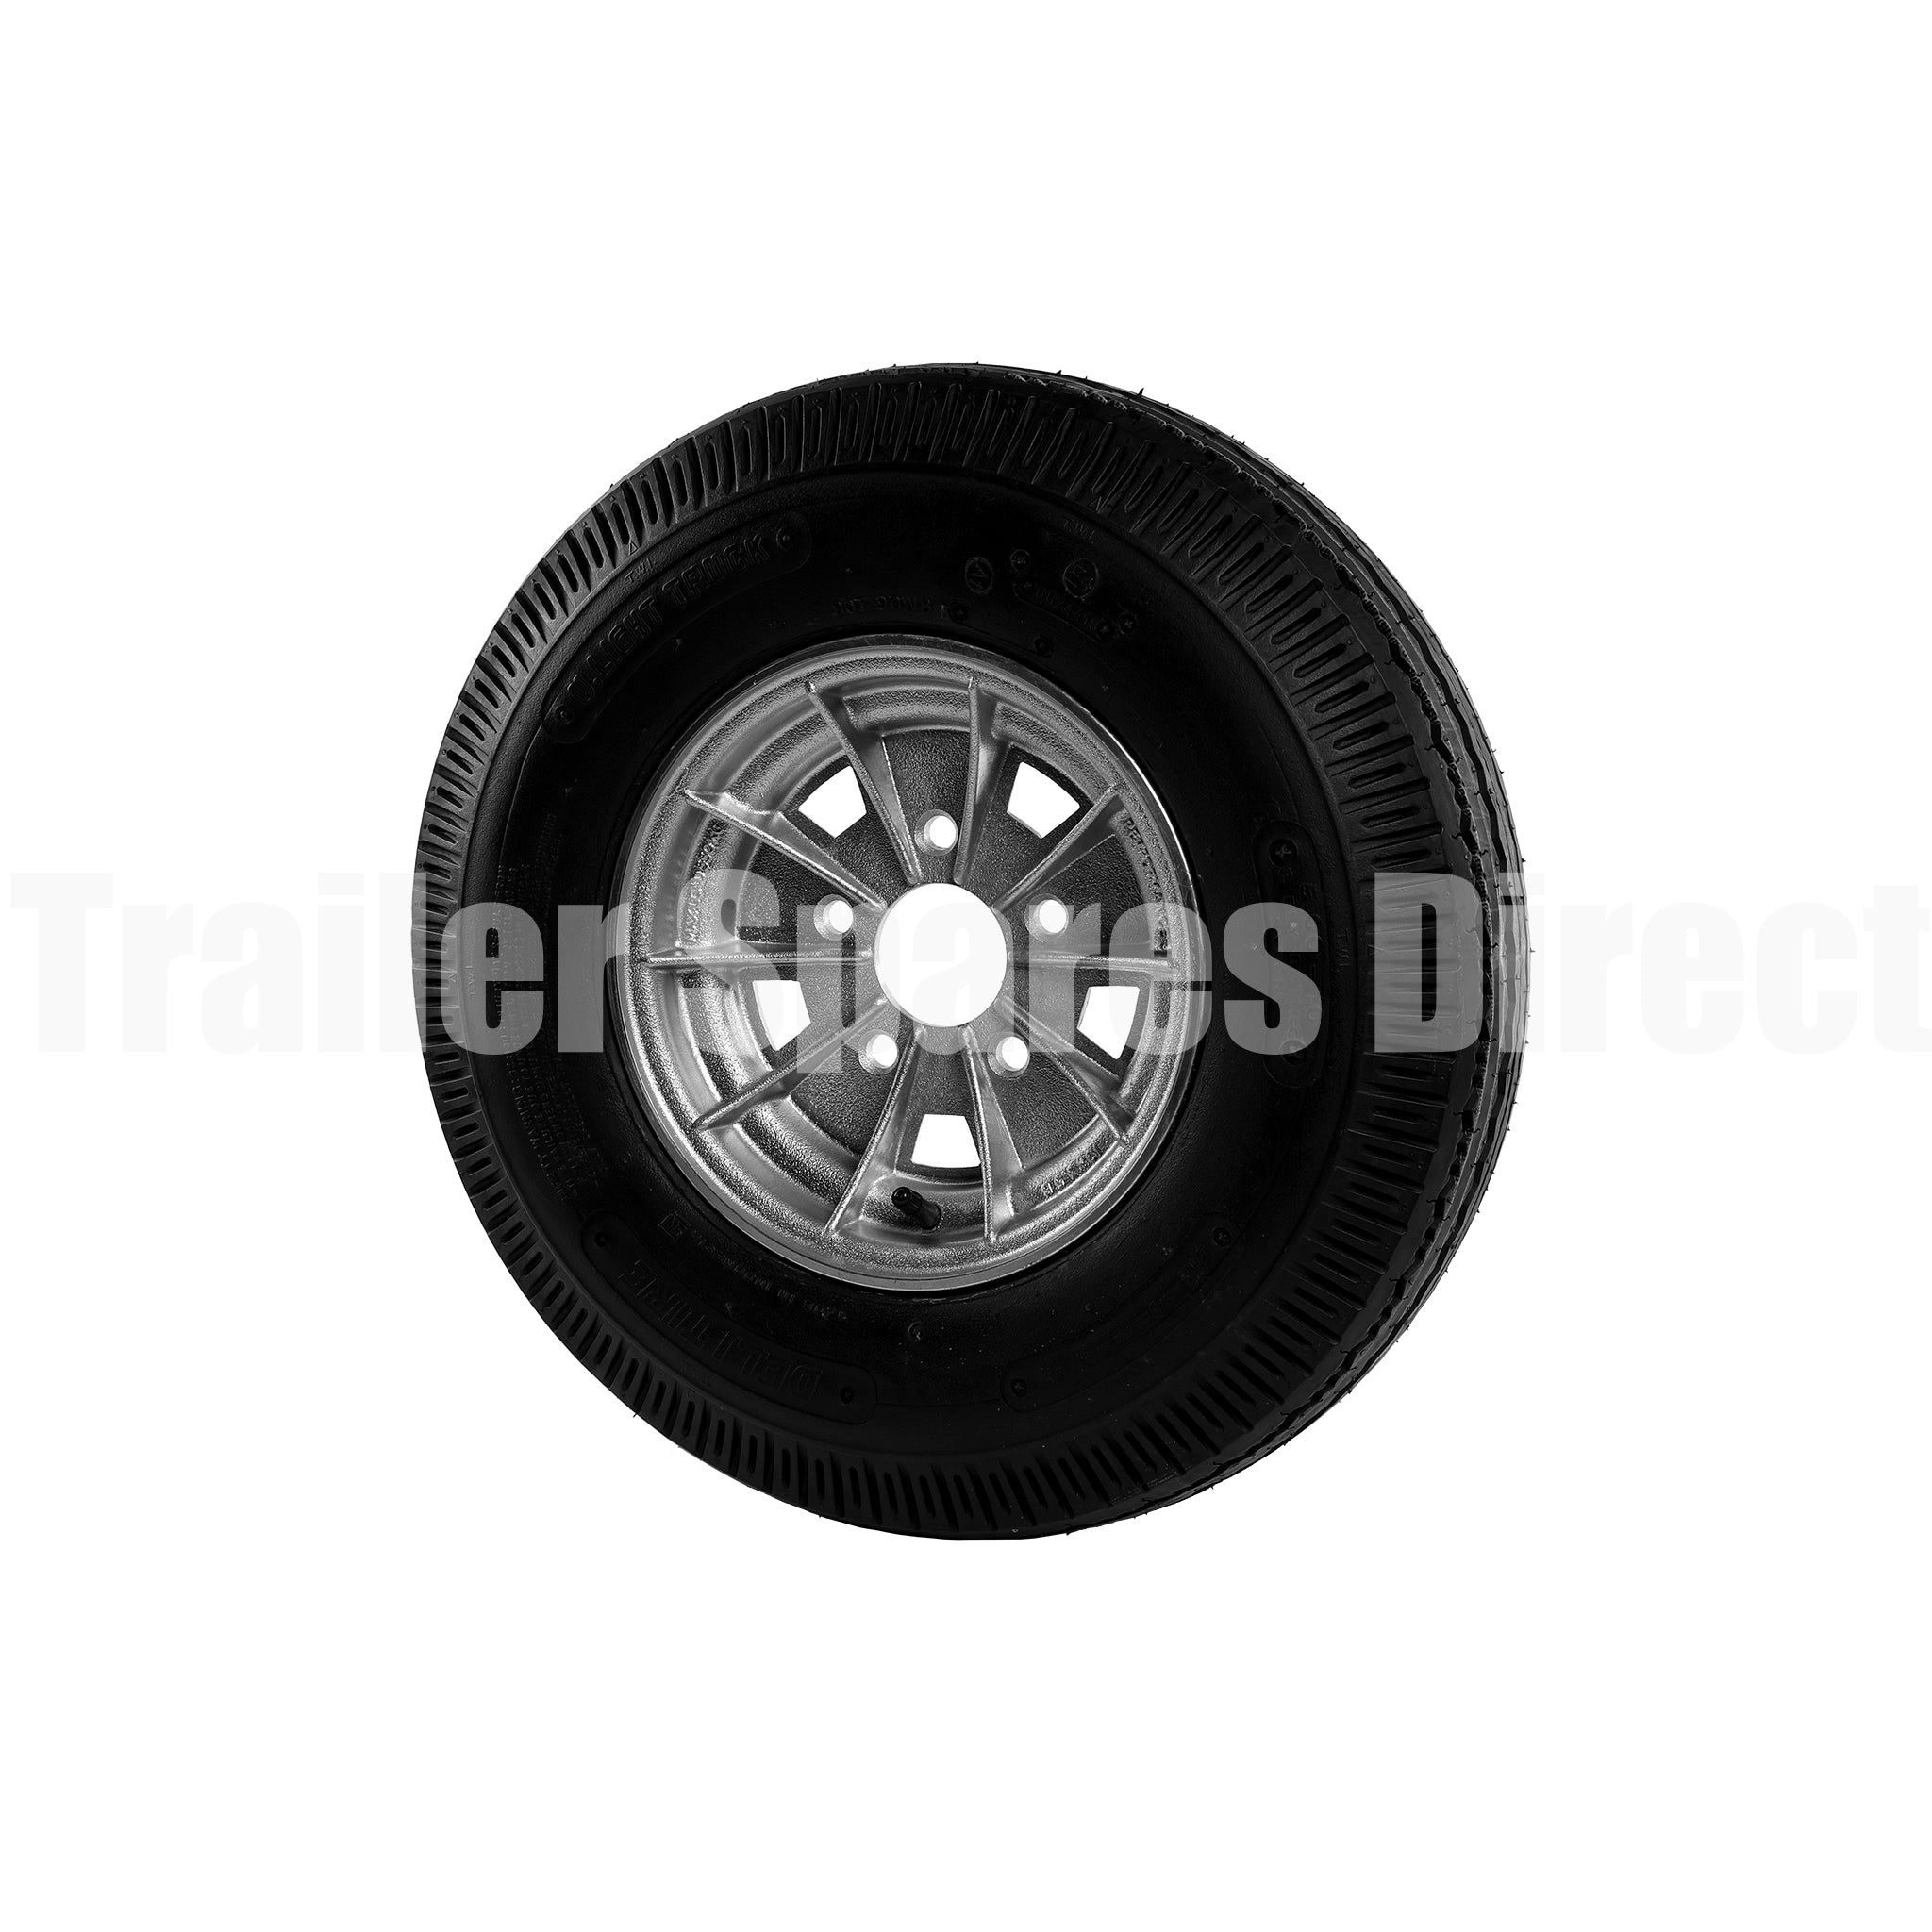 Assembled 10 inch alloy rim and tyre HT pattern